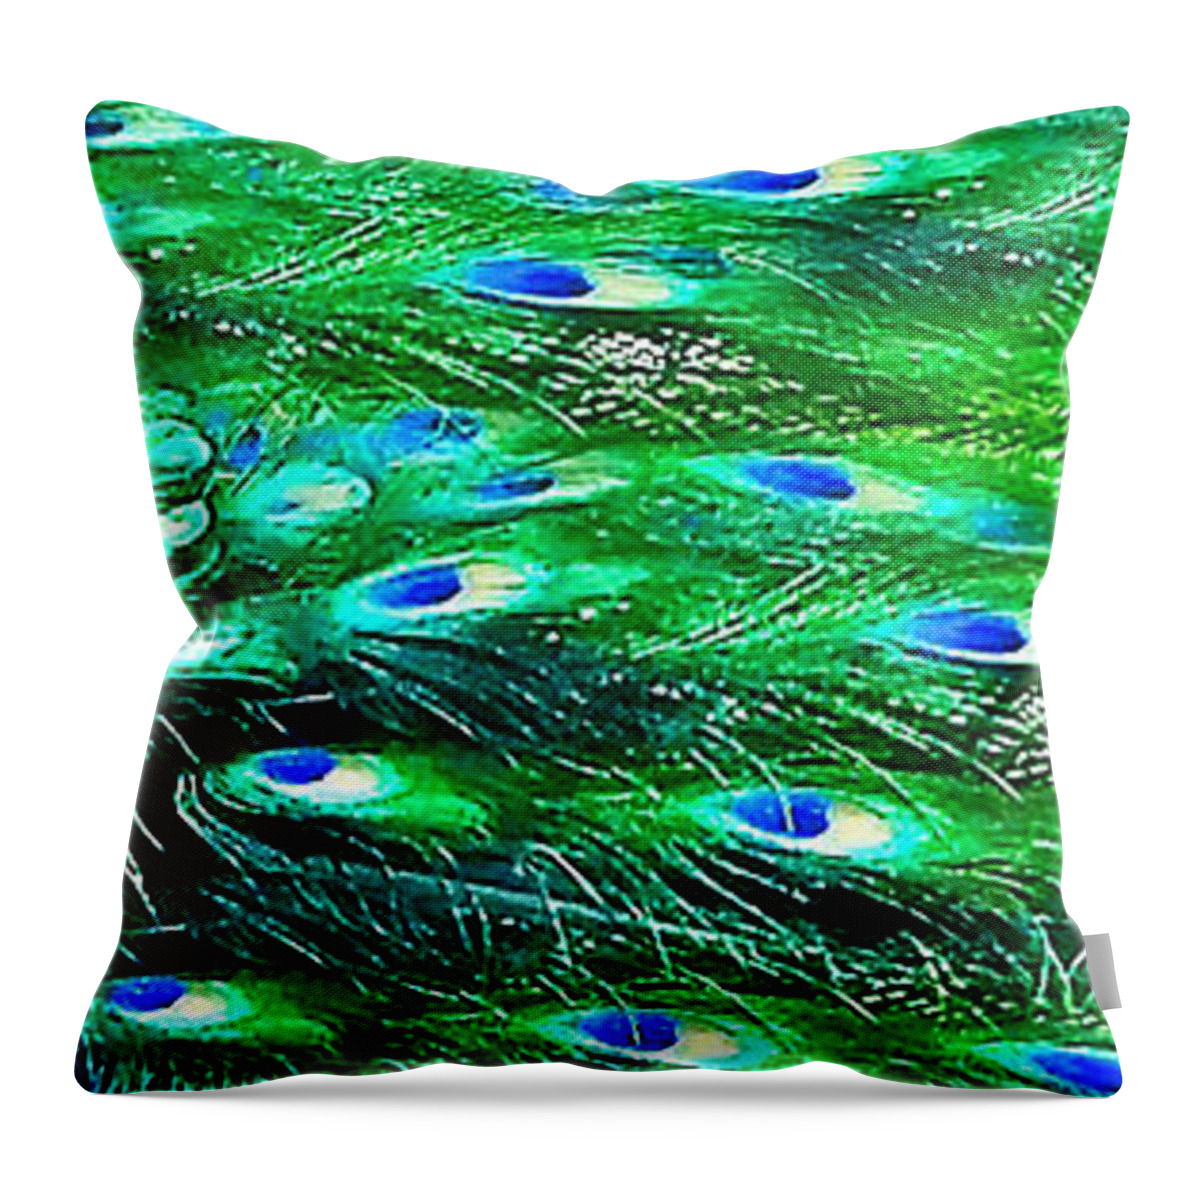 Blue Throw Pillow featuring the photograph Bejeweled by Amanda Smith